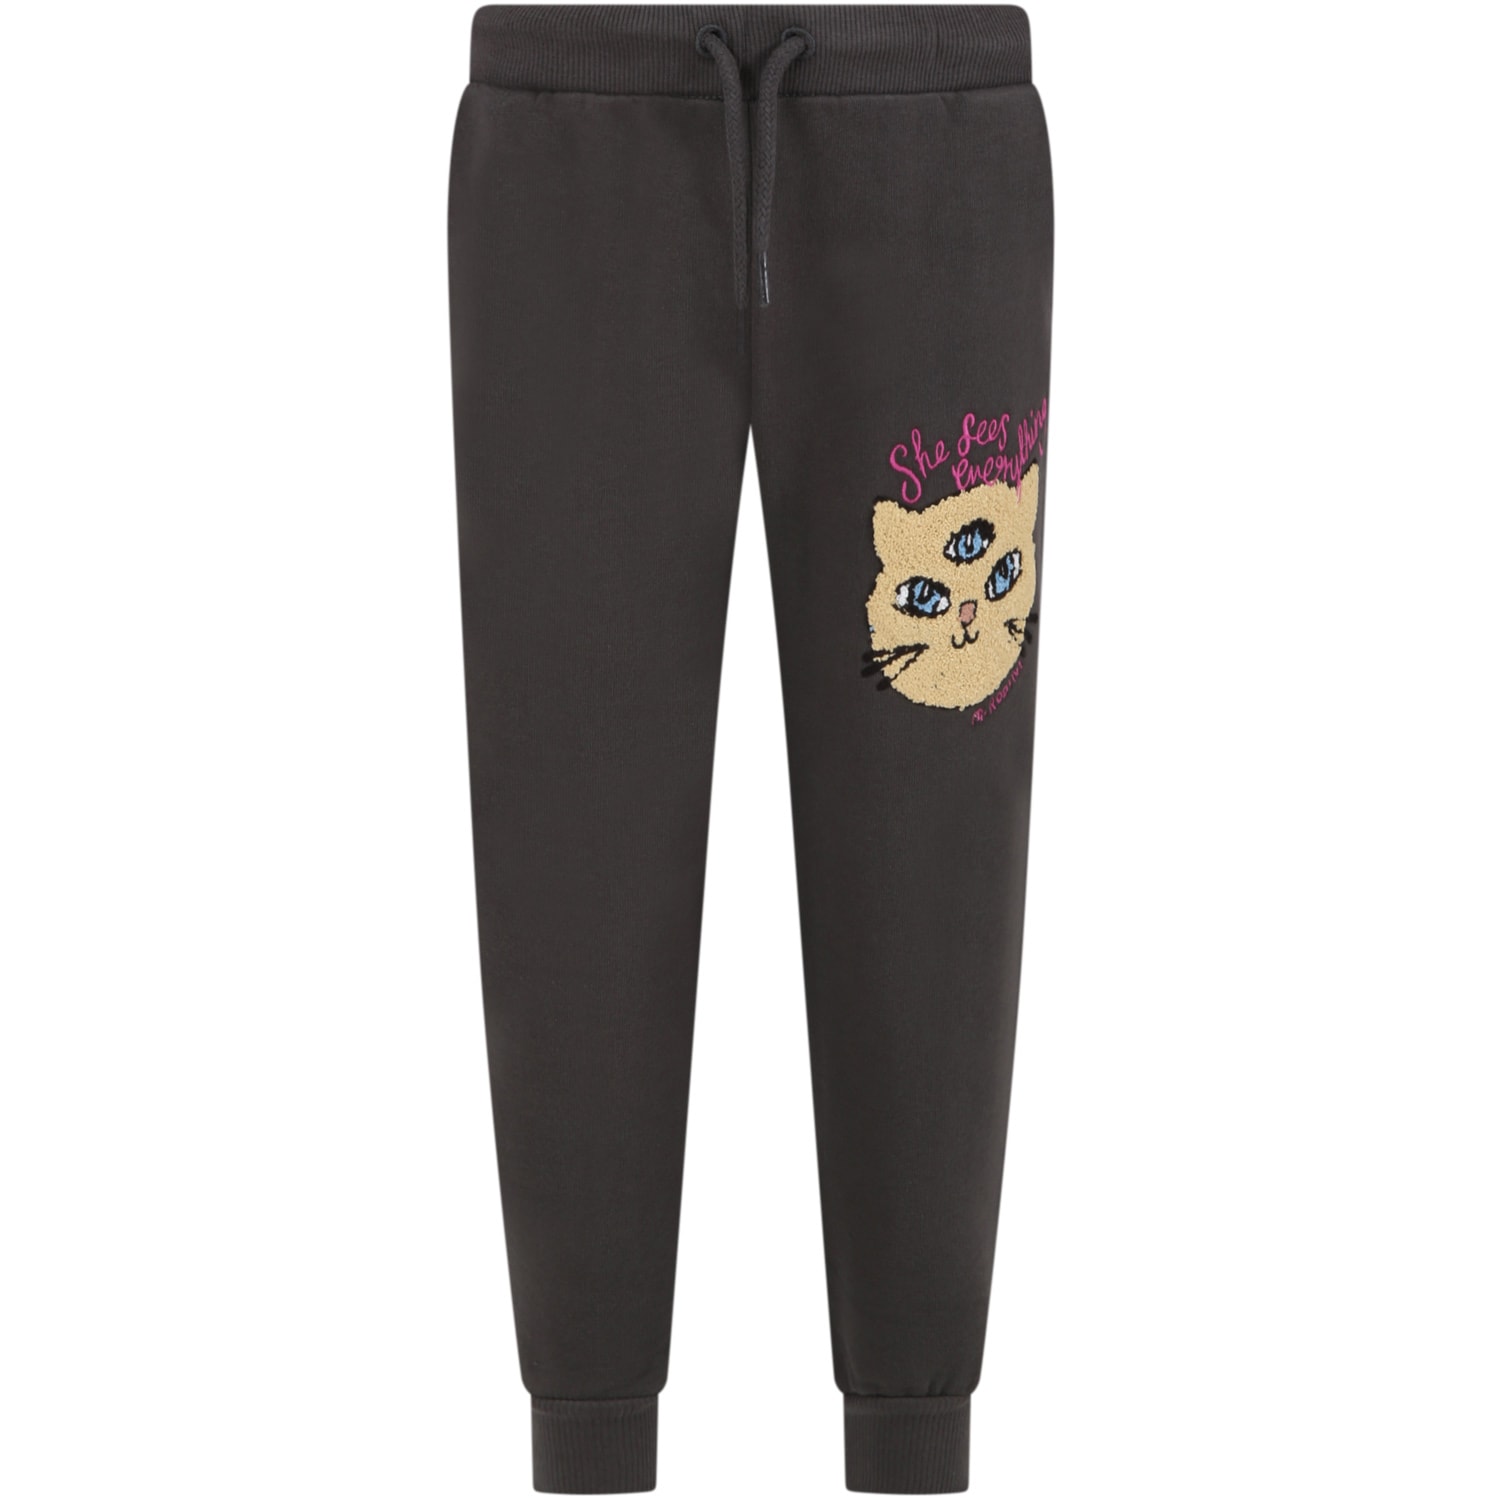 Mini Rodini Black Sweatpants For Girl With She Sees Everything Print